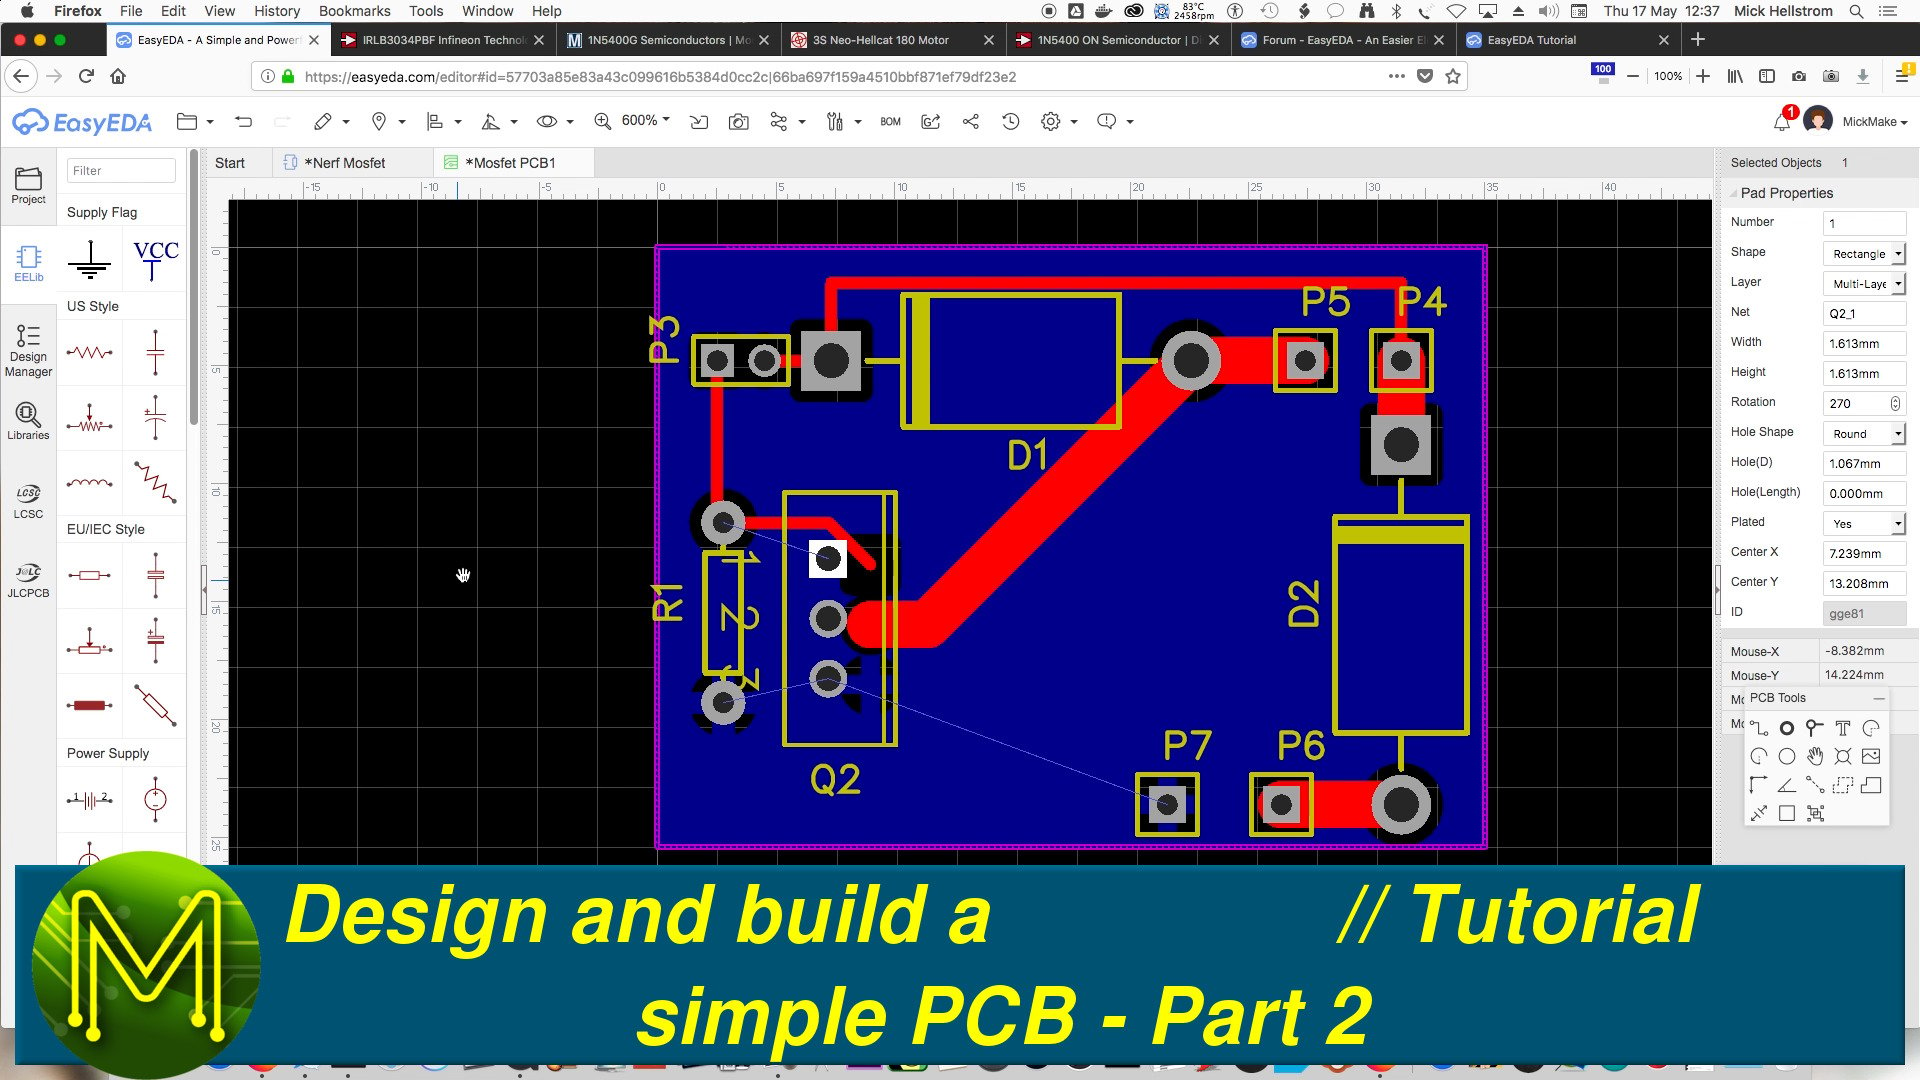 Teaching a mate how to design and build a simple PCB - Episode 02